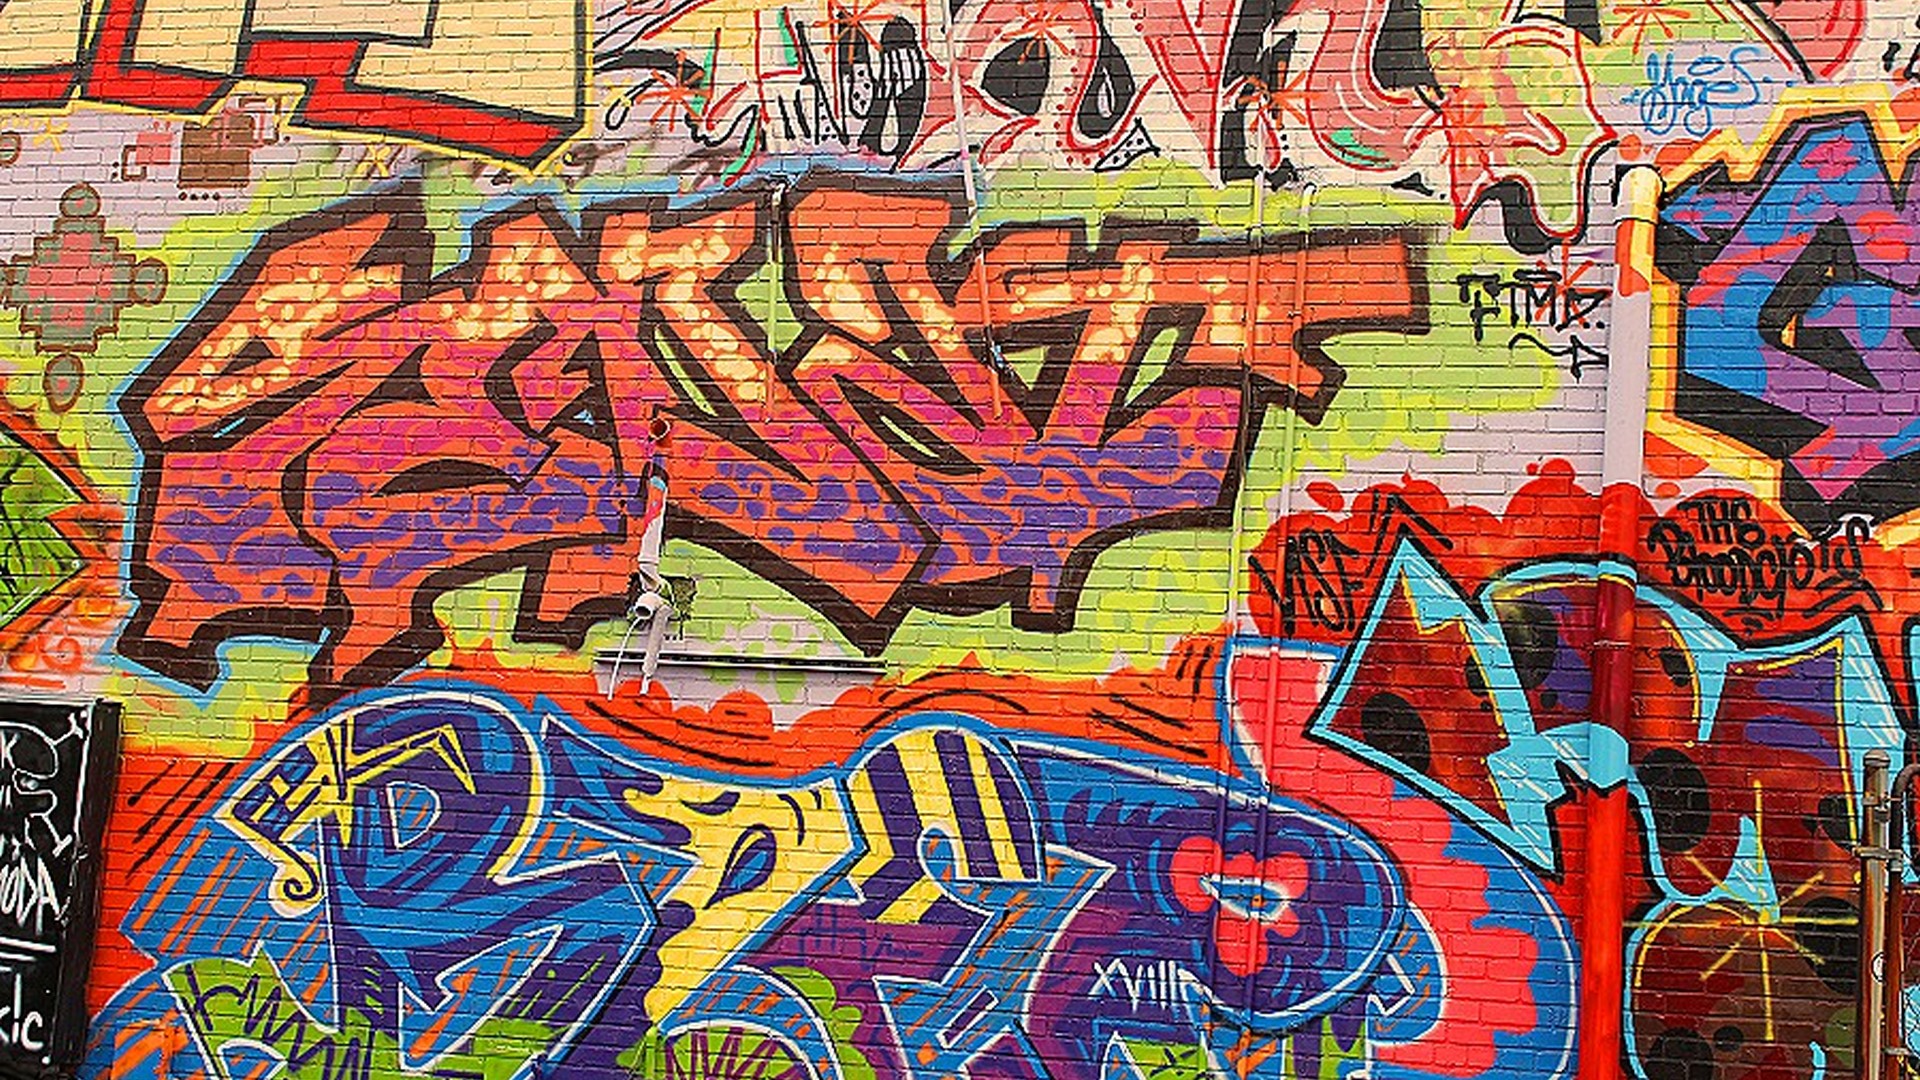 Graffiti Letters Background Wallpaper HD with image resolution 1920x1080 pixel. You can make this wallpaper for your Desktop Computer Backgrounds, Mac Wallpapers, Android Lock screen or iPhone Screensavers